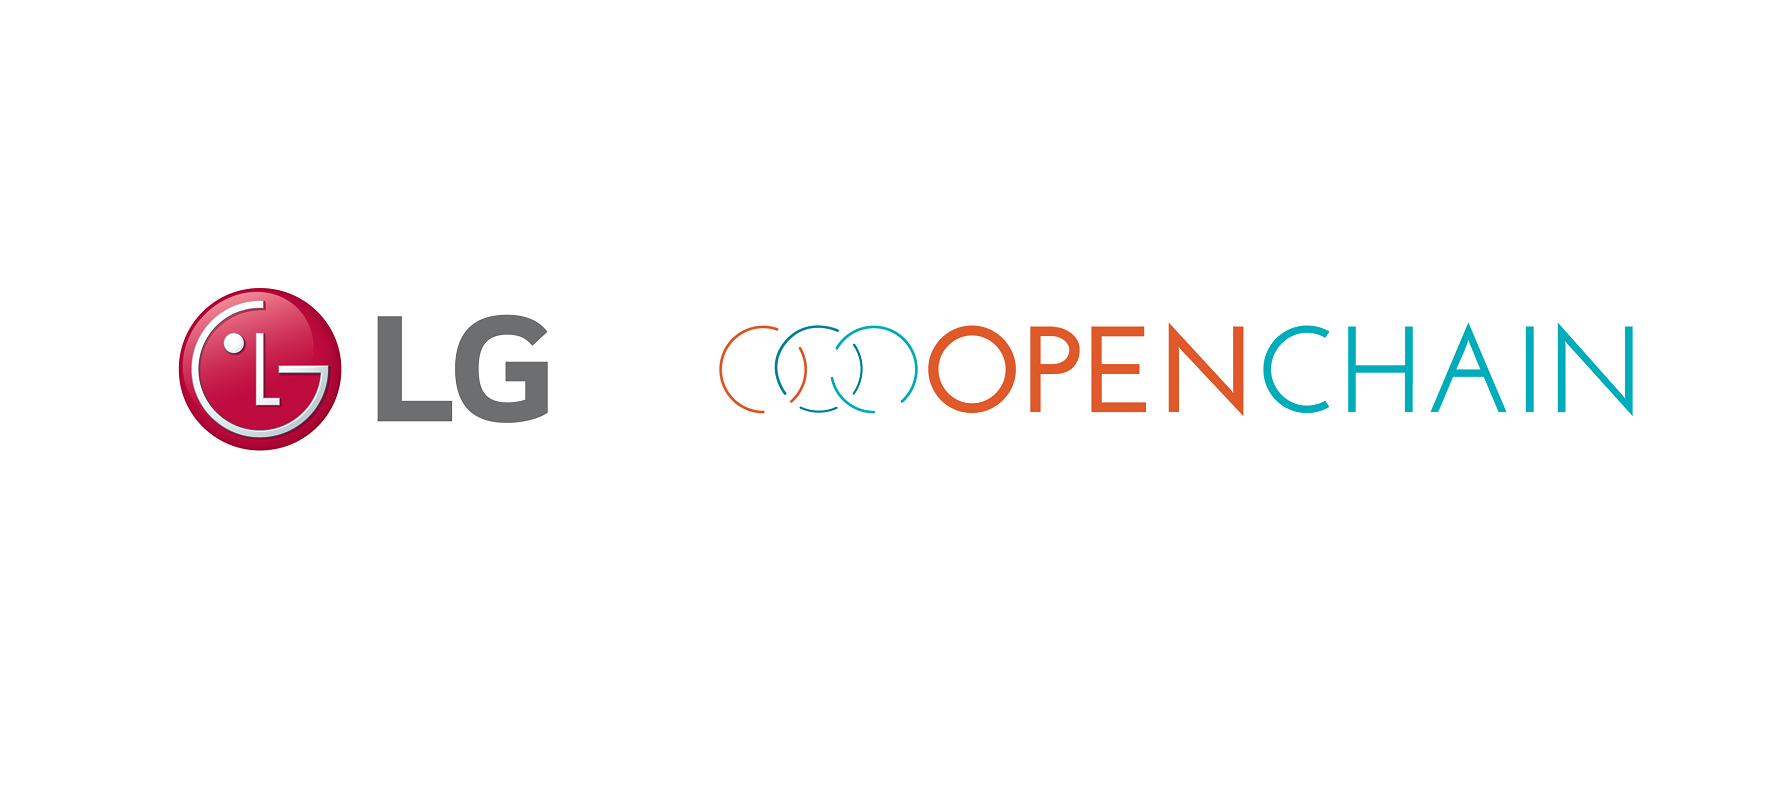 Lg Becomes The First Company In The Industry To Achieve Compliance With Security Management Of Open Source Software